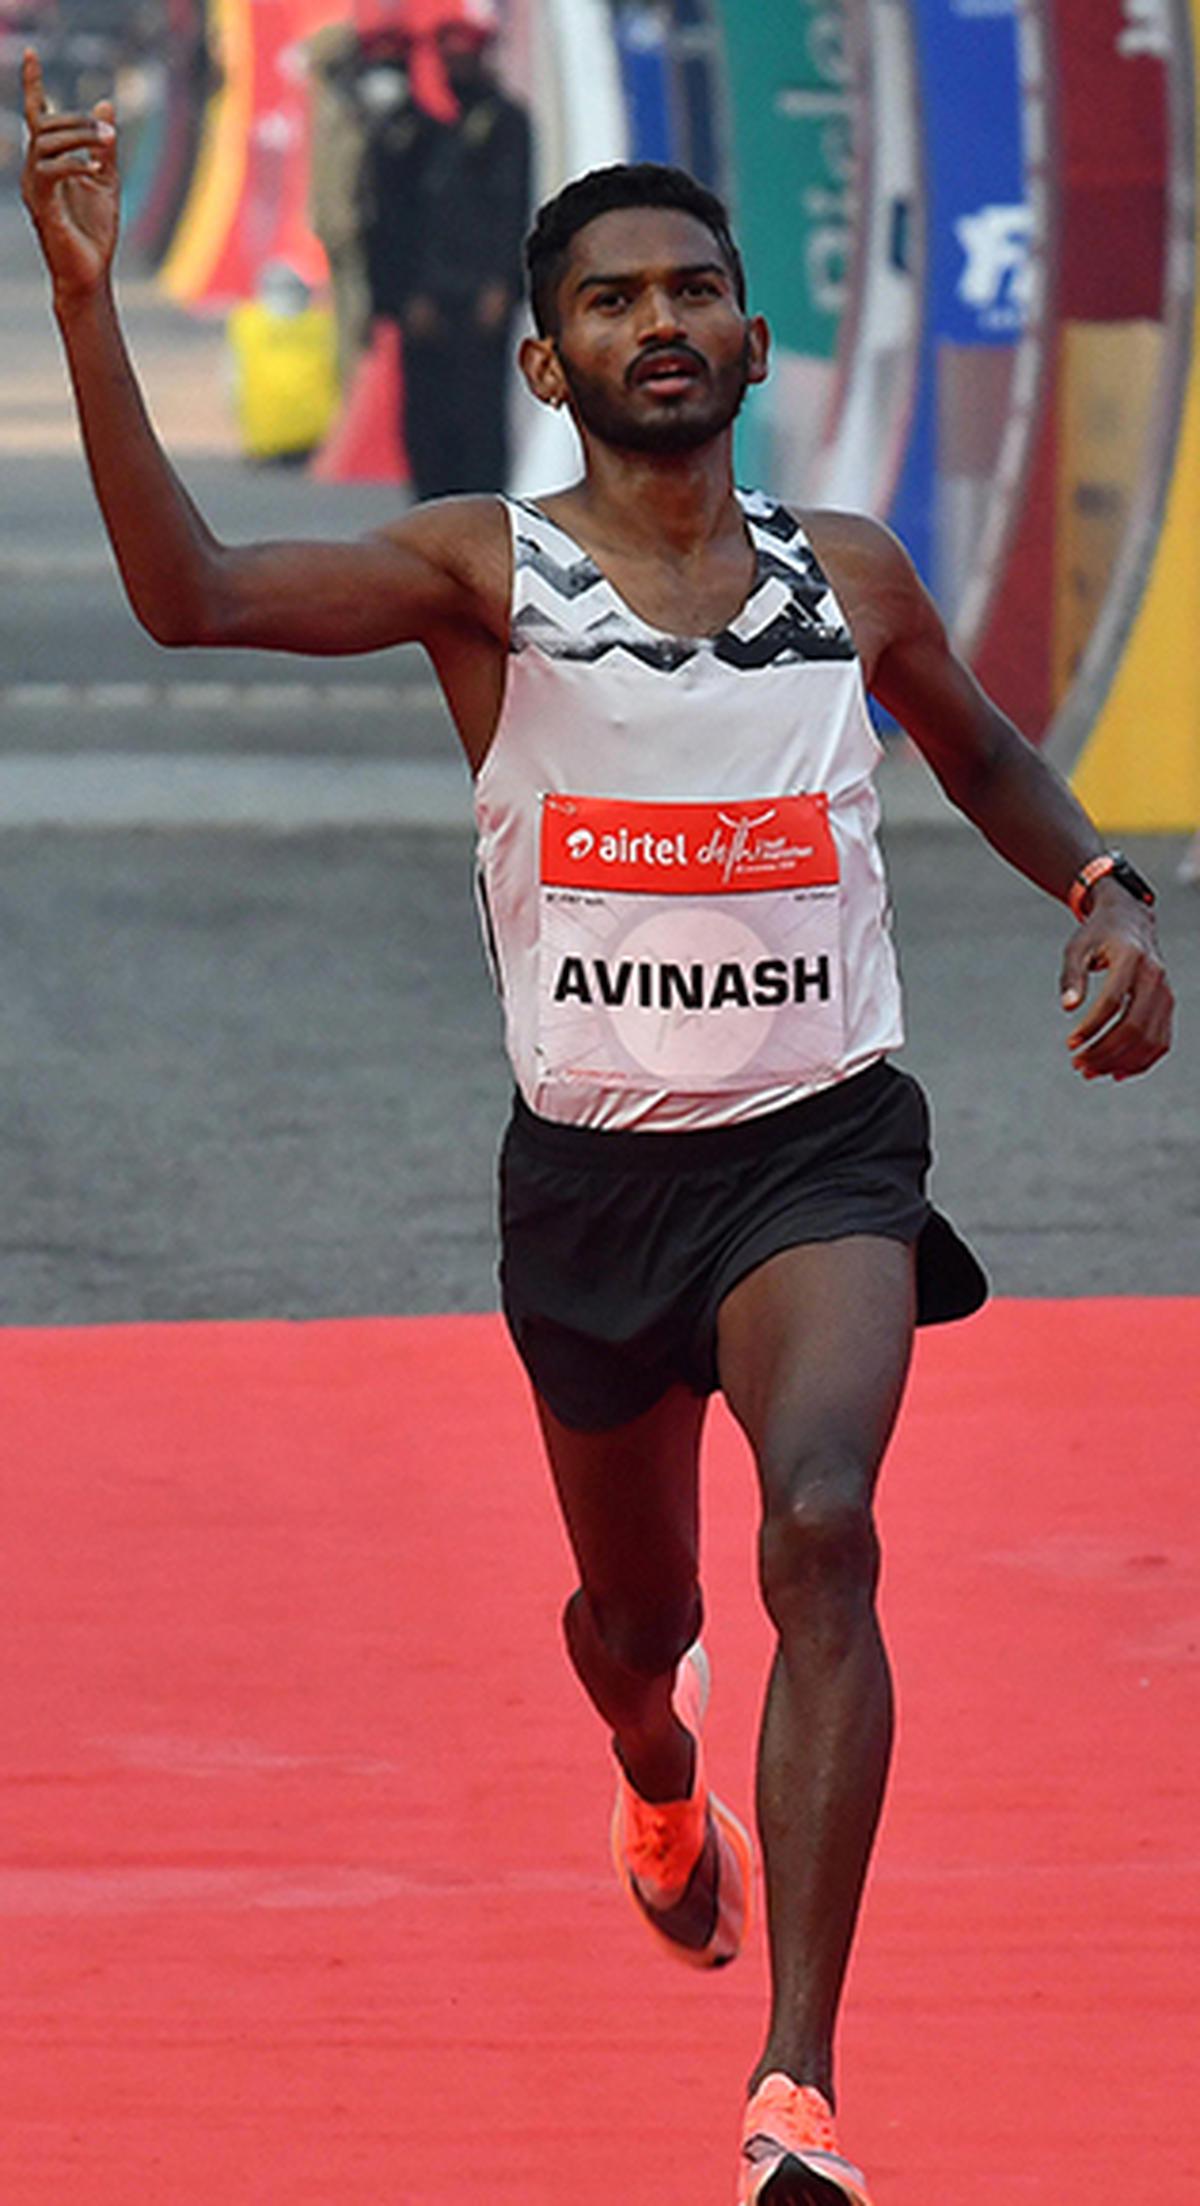 Within reach: According to Adhana, who introduced him to steeplechase, Sable has in it him to win a medal at the Commonwealth Games and a gold at the Asian Games.